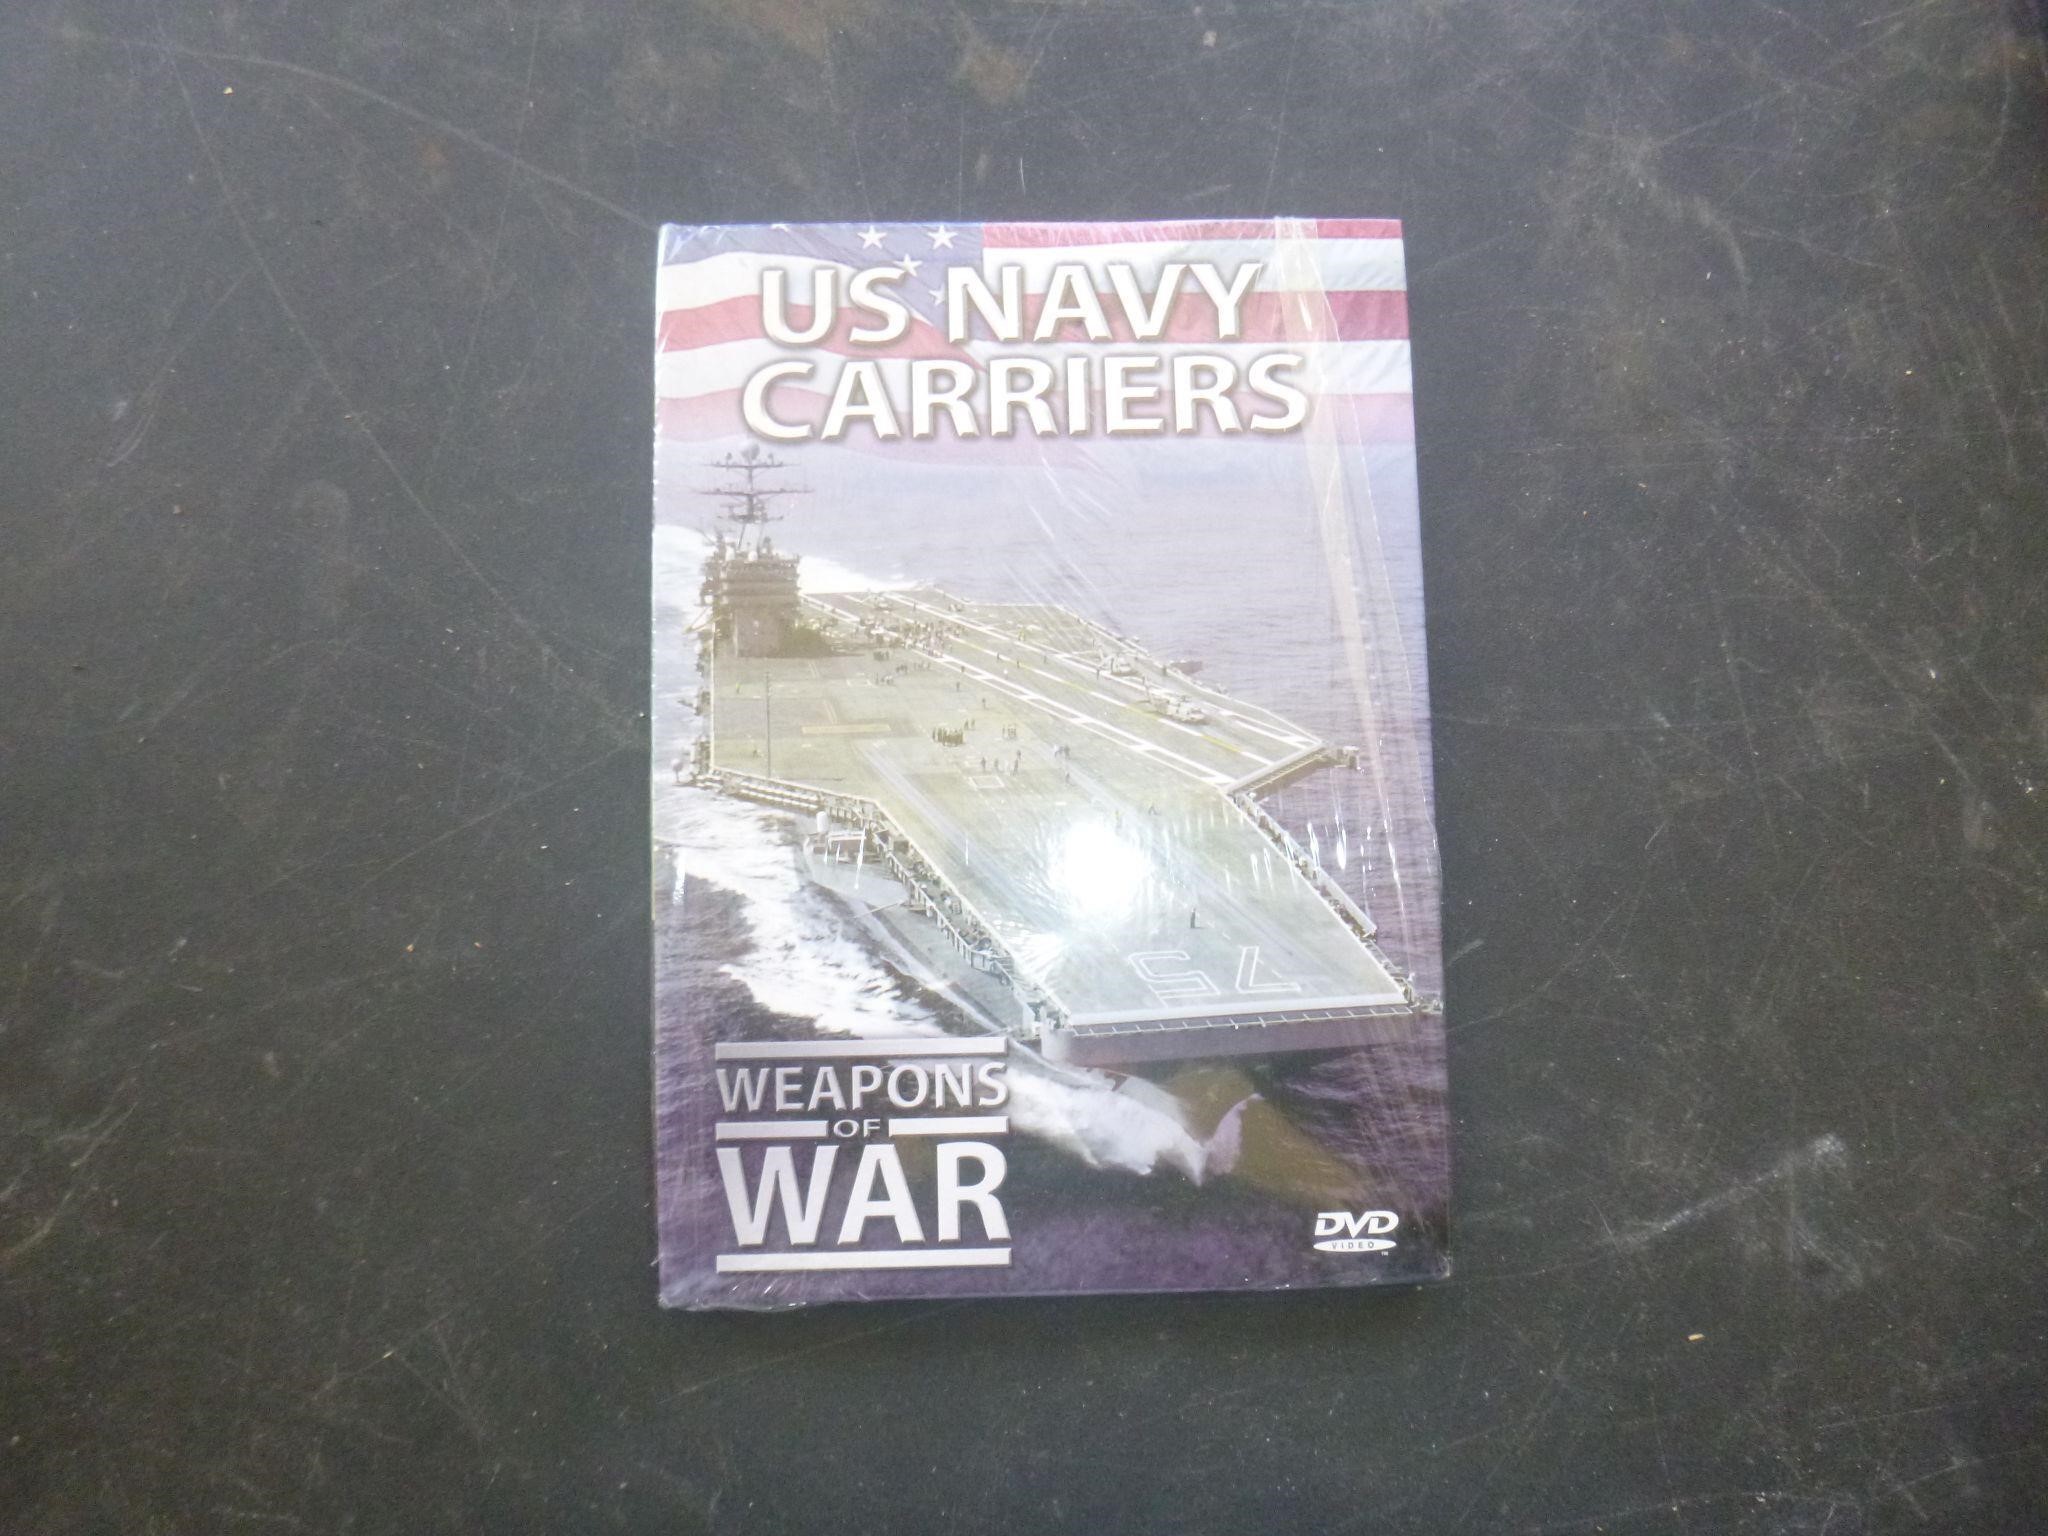 US NAVY CARRIERS DVD